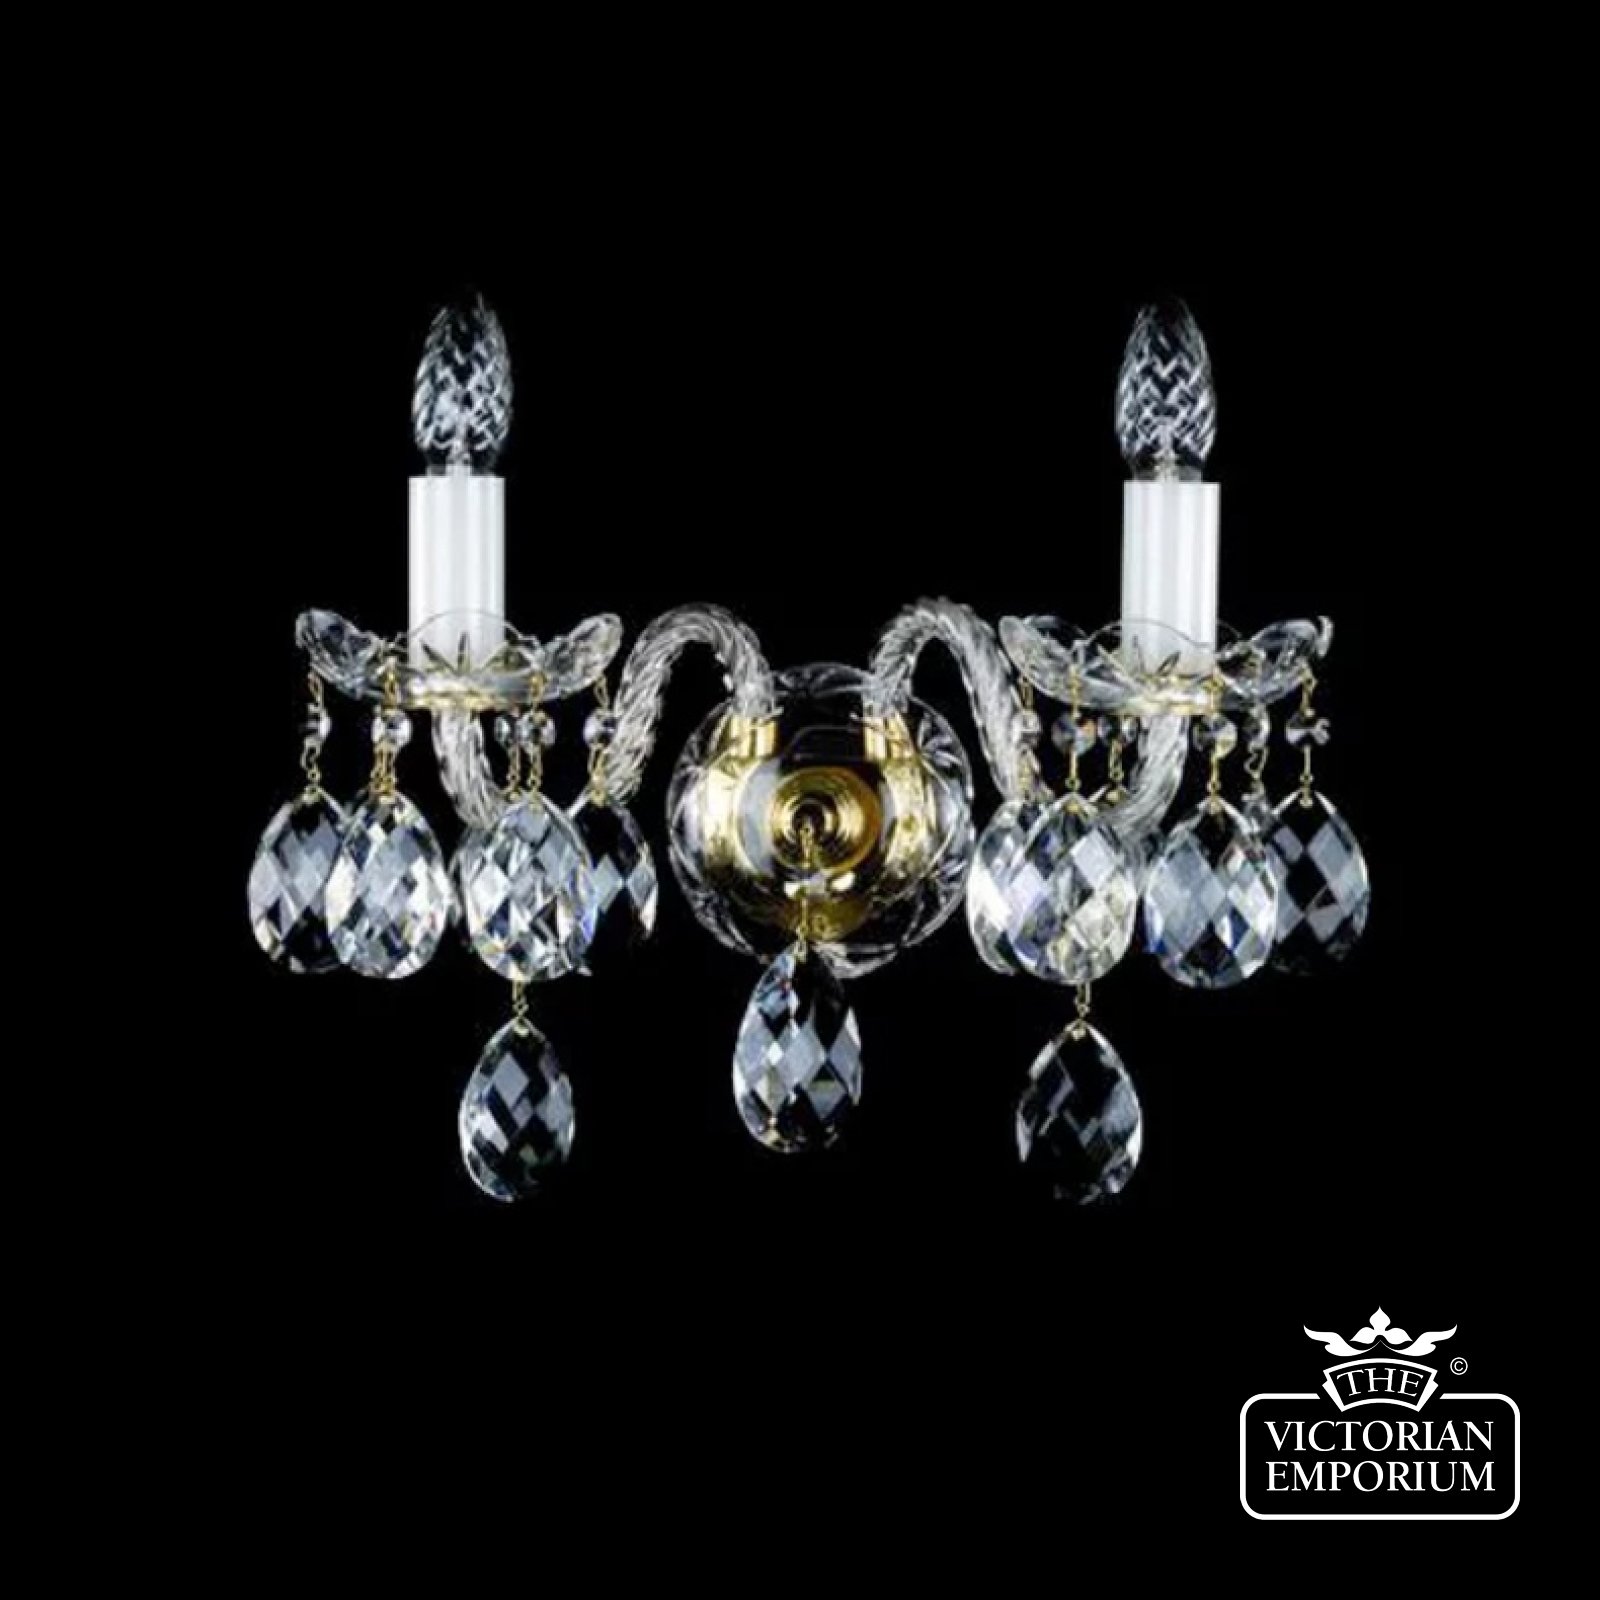 Tibera Double Wall Sconce With Oval-shaped Crystals